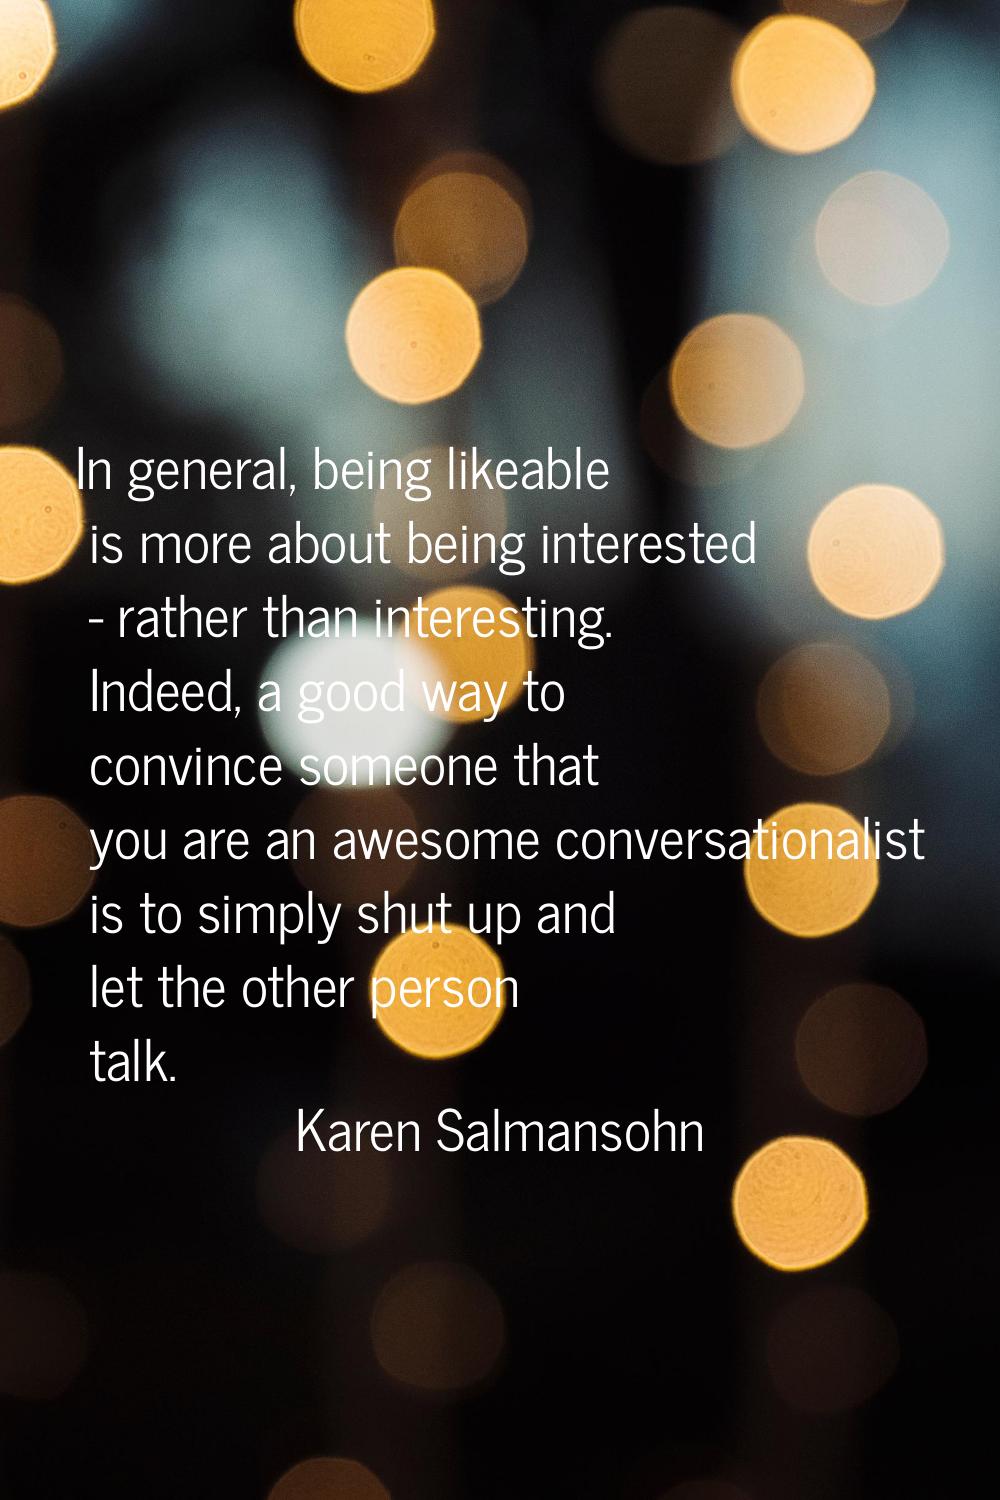 In general, being likeable is more about being interested - rather than interesting. Indeed, a good